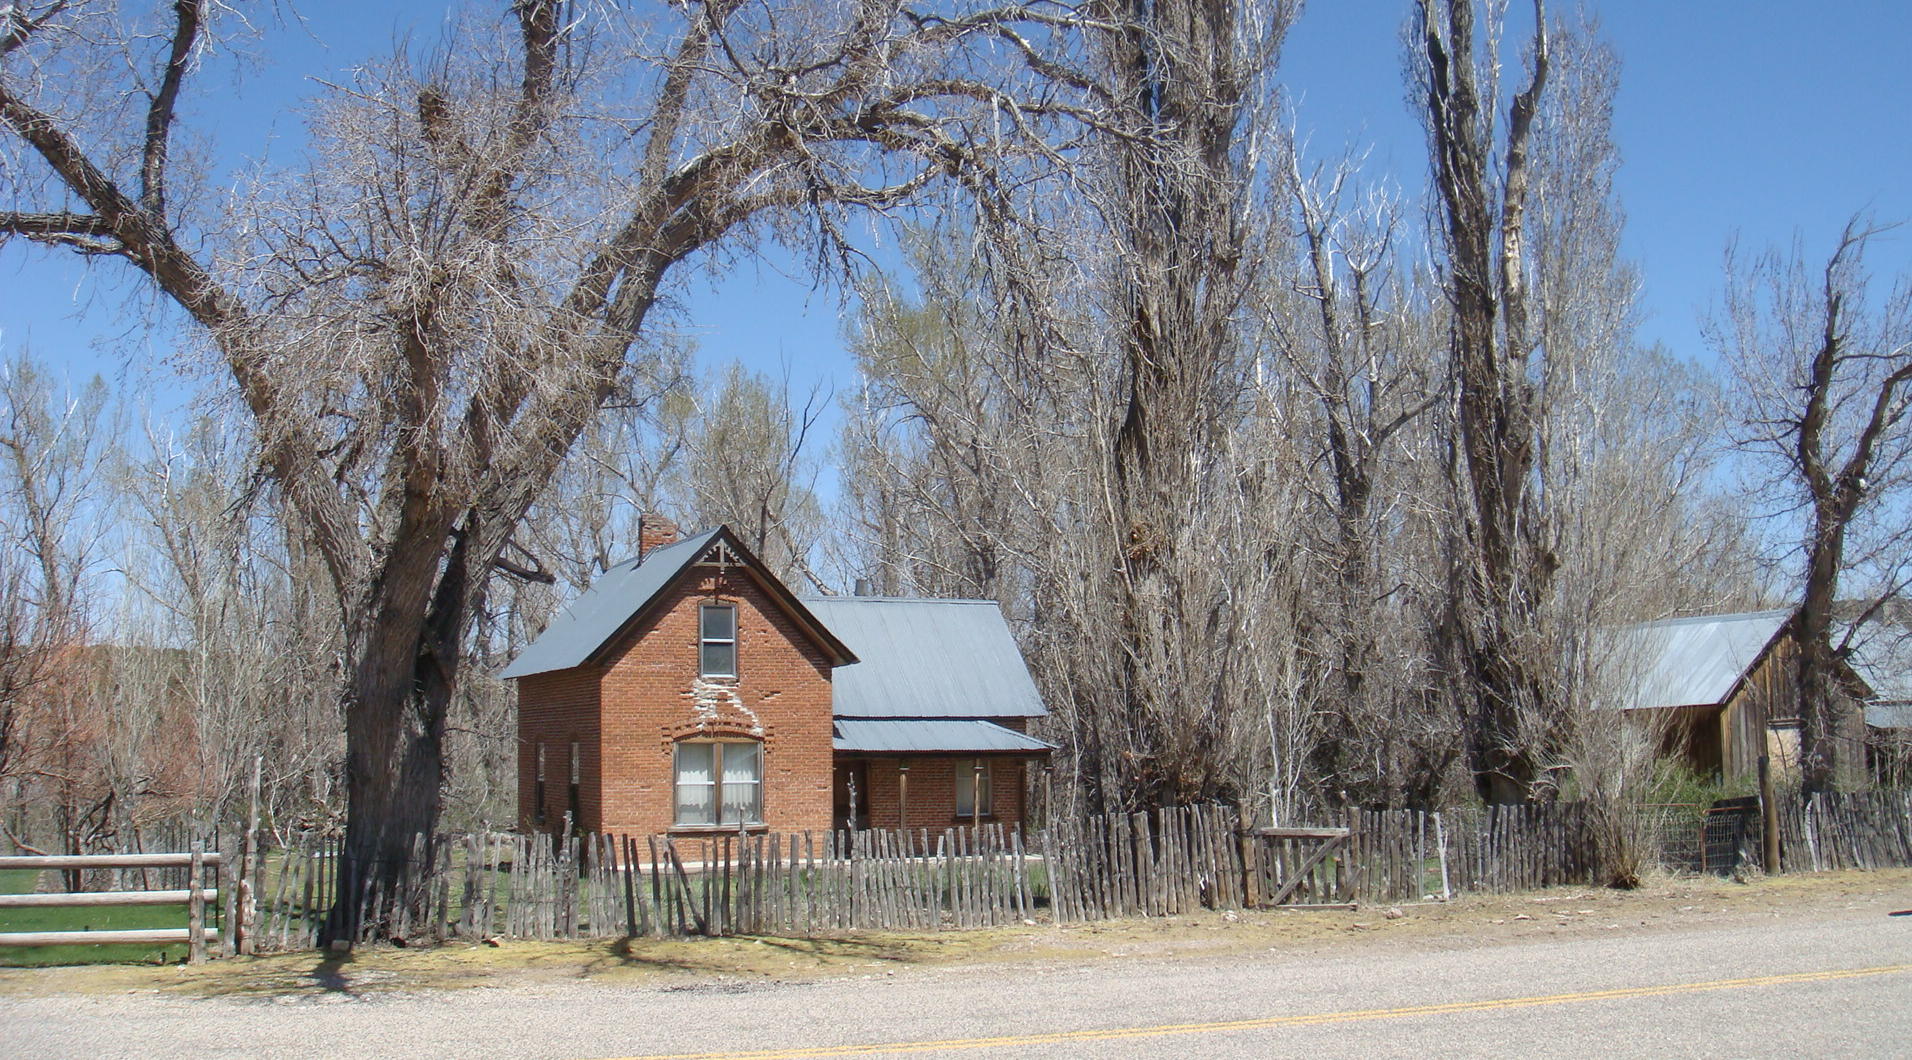 Two houses on the Terry Ranch